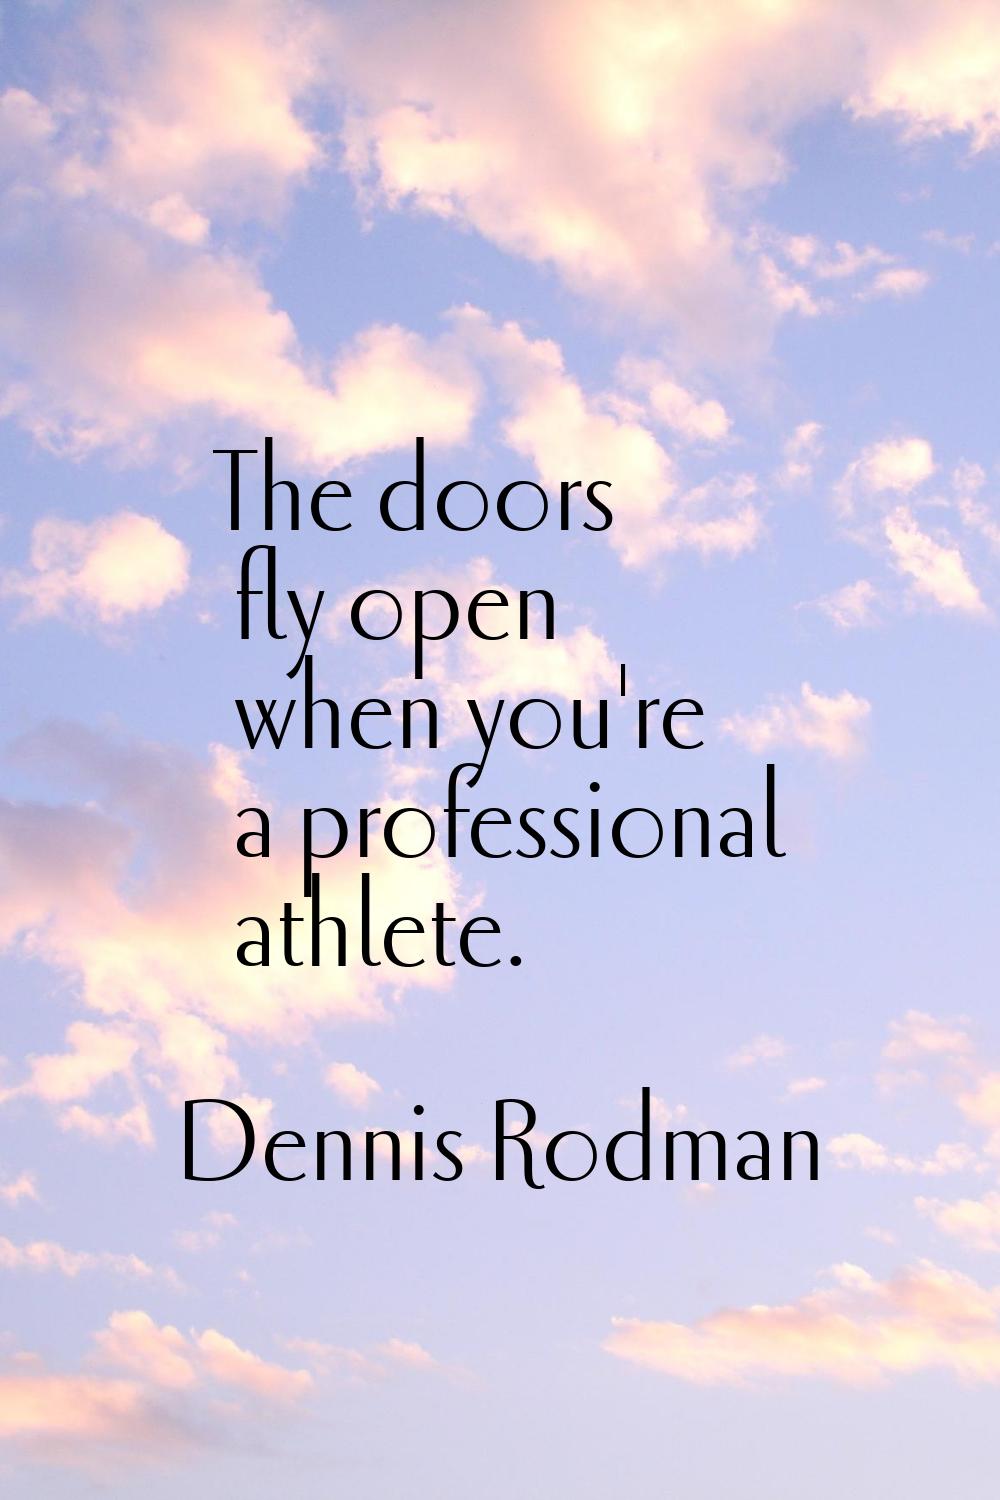 The doors fly open when you're a professional athlete.